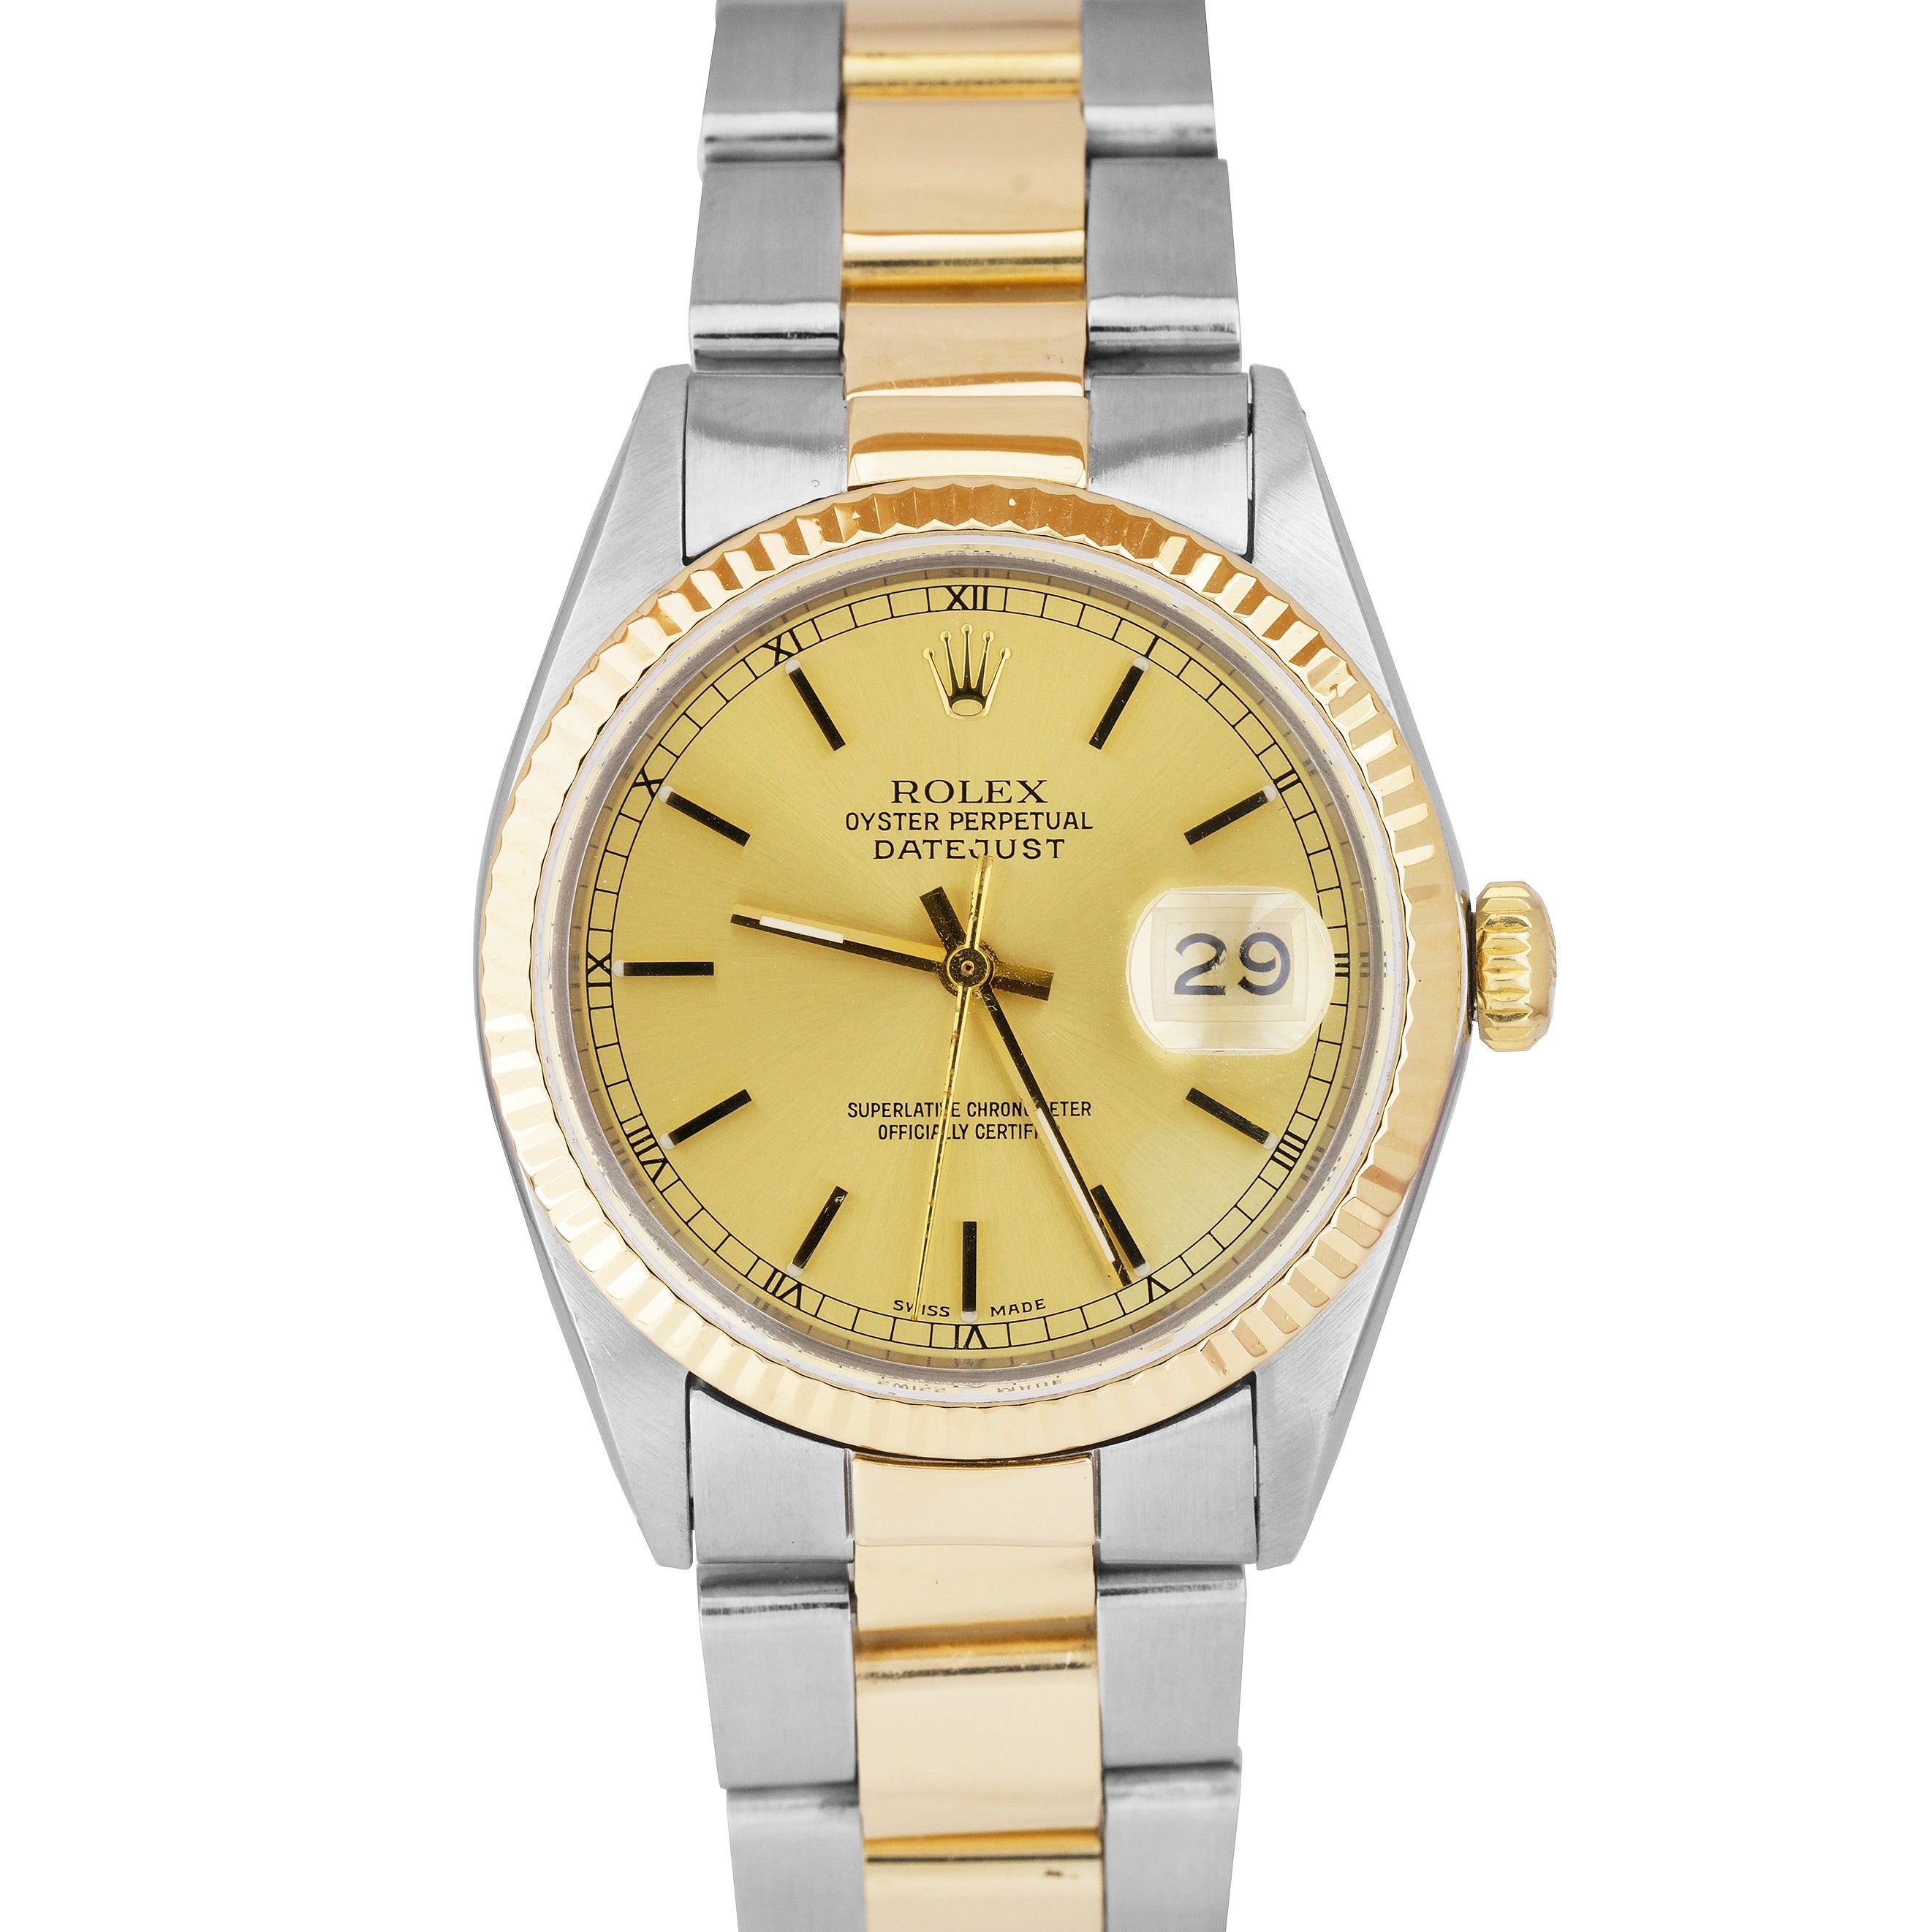 Rolex DateJust 36mm Two-Tone Yellow Gold Stainless Champagne Oyster Watch 16013